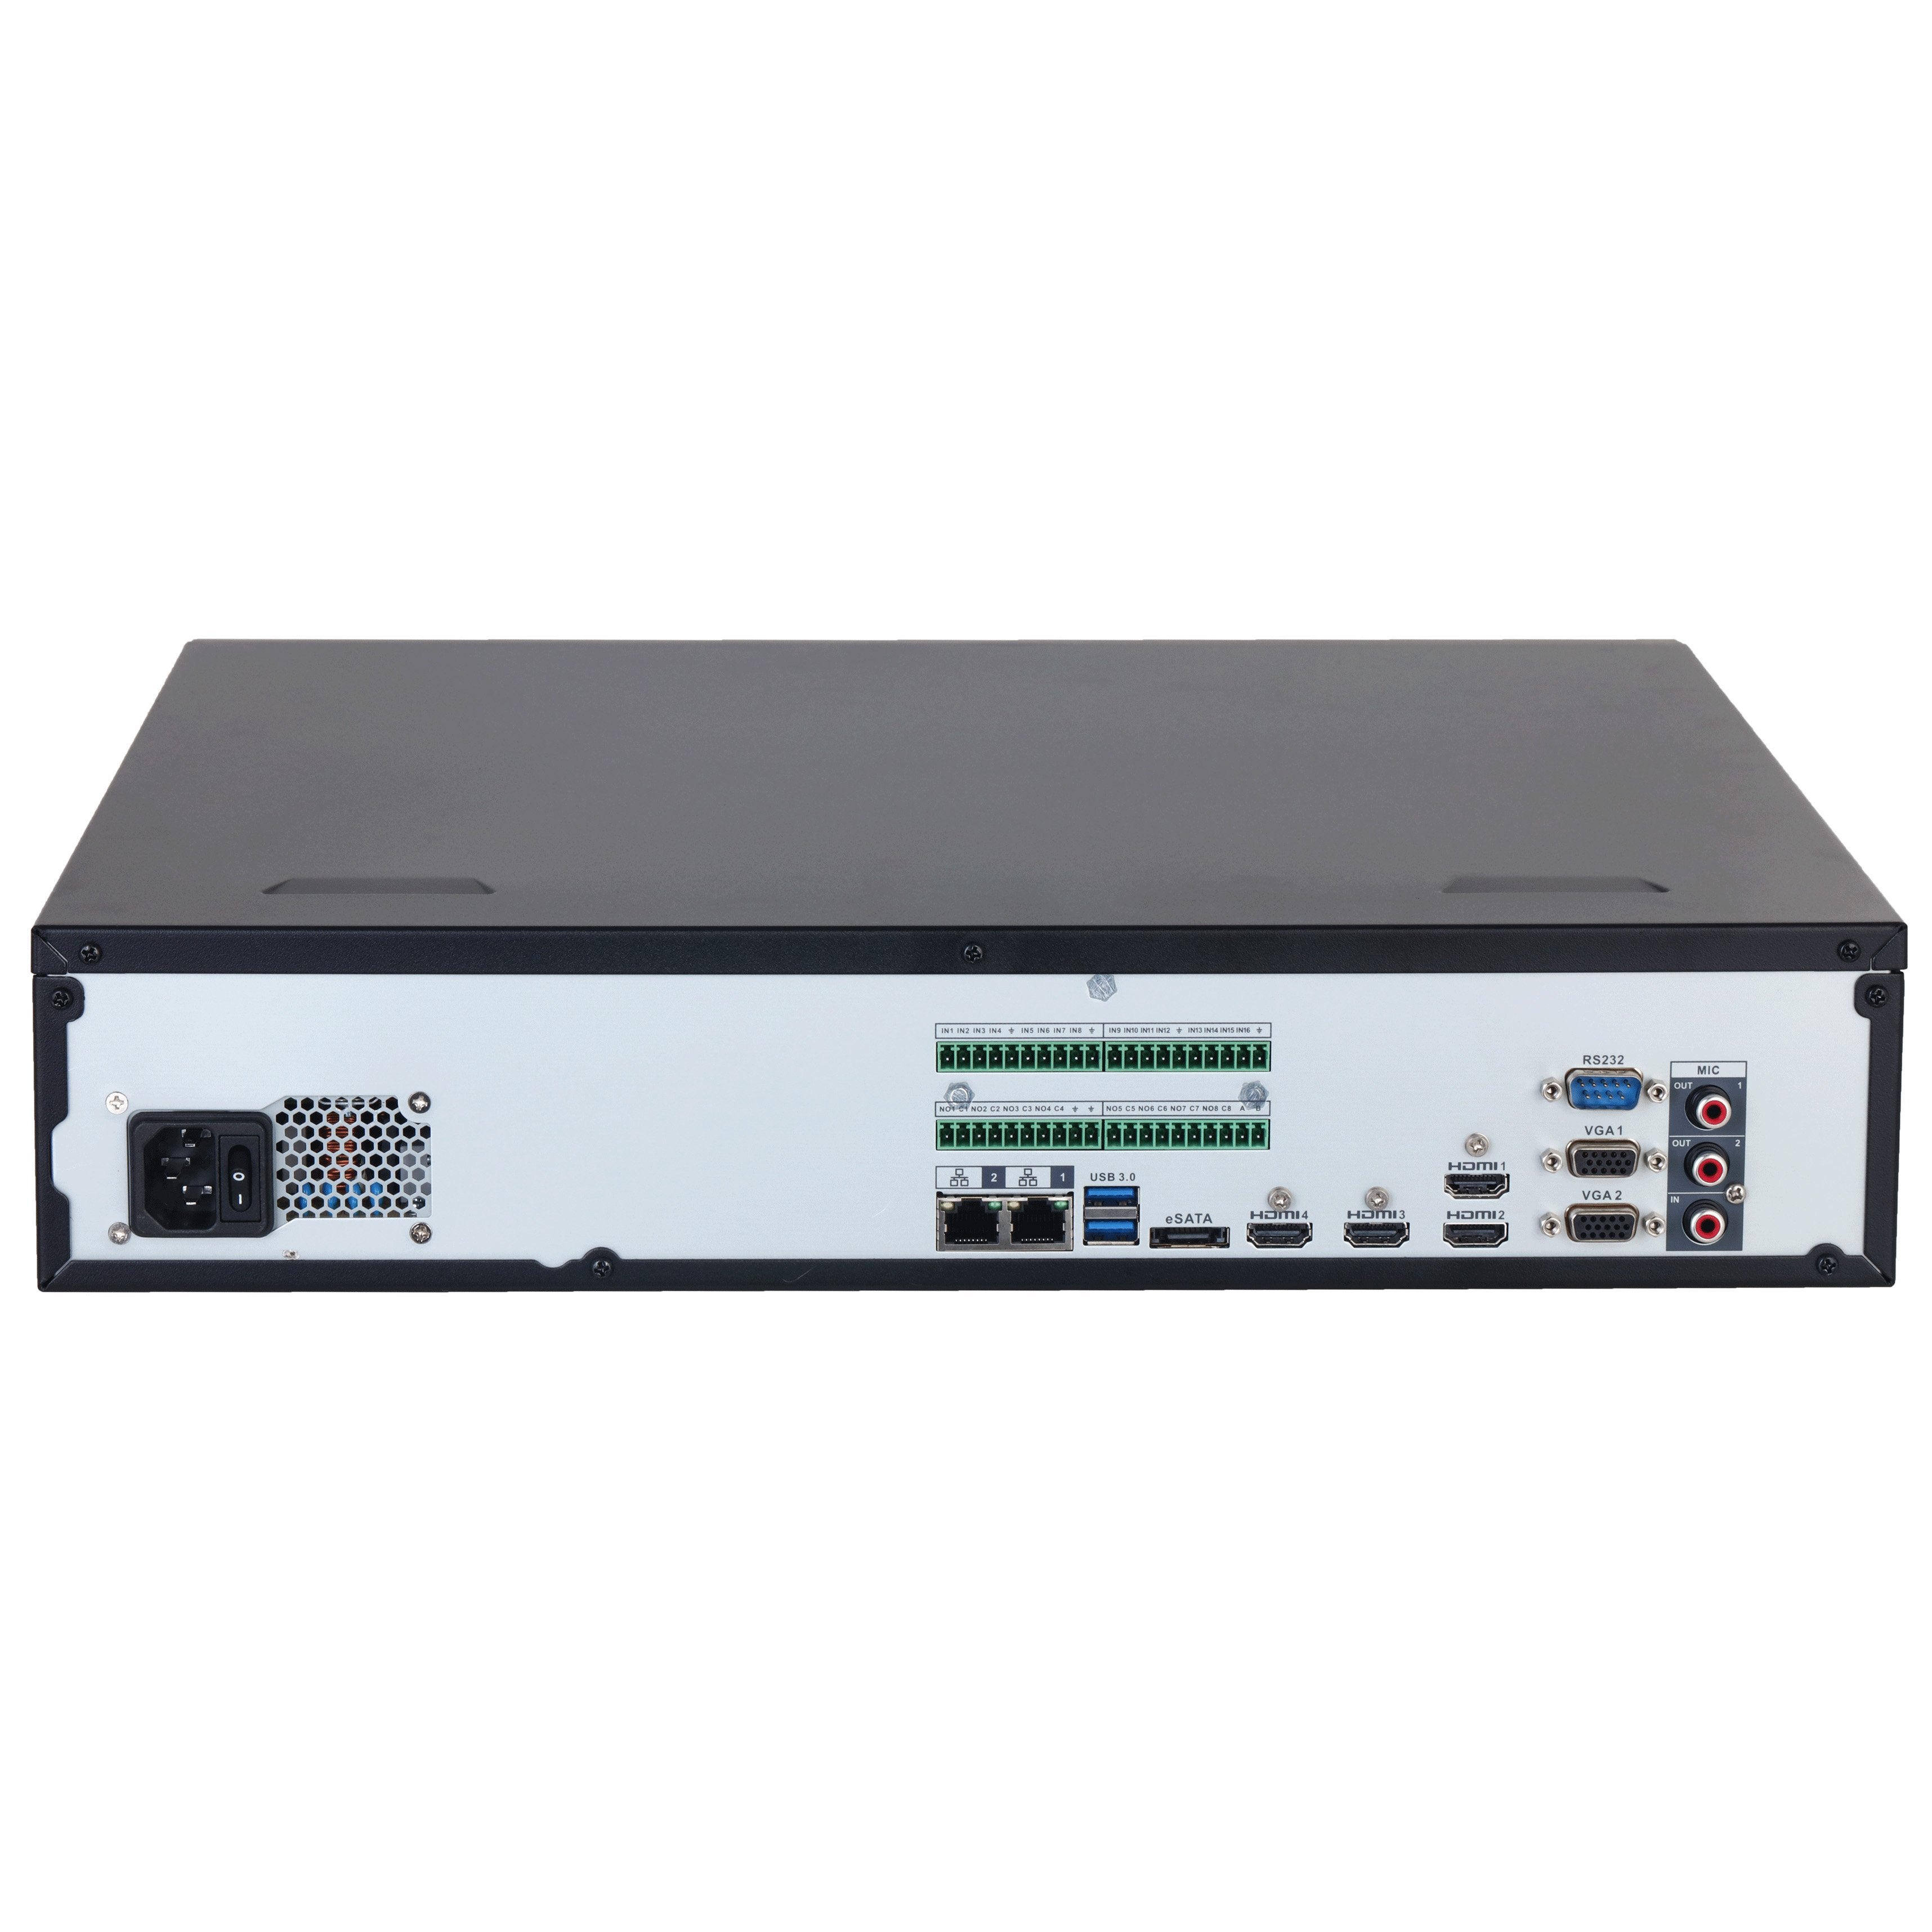 Dahua 32 Channel, WizMind AI Series, 2RU, 1024MB (512MB With AI Function Enabled), 2 x Gigabit NIC, 8 x HDD **NO POE PORTS OR HDD INSTALLED**